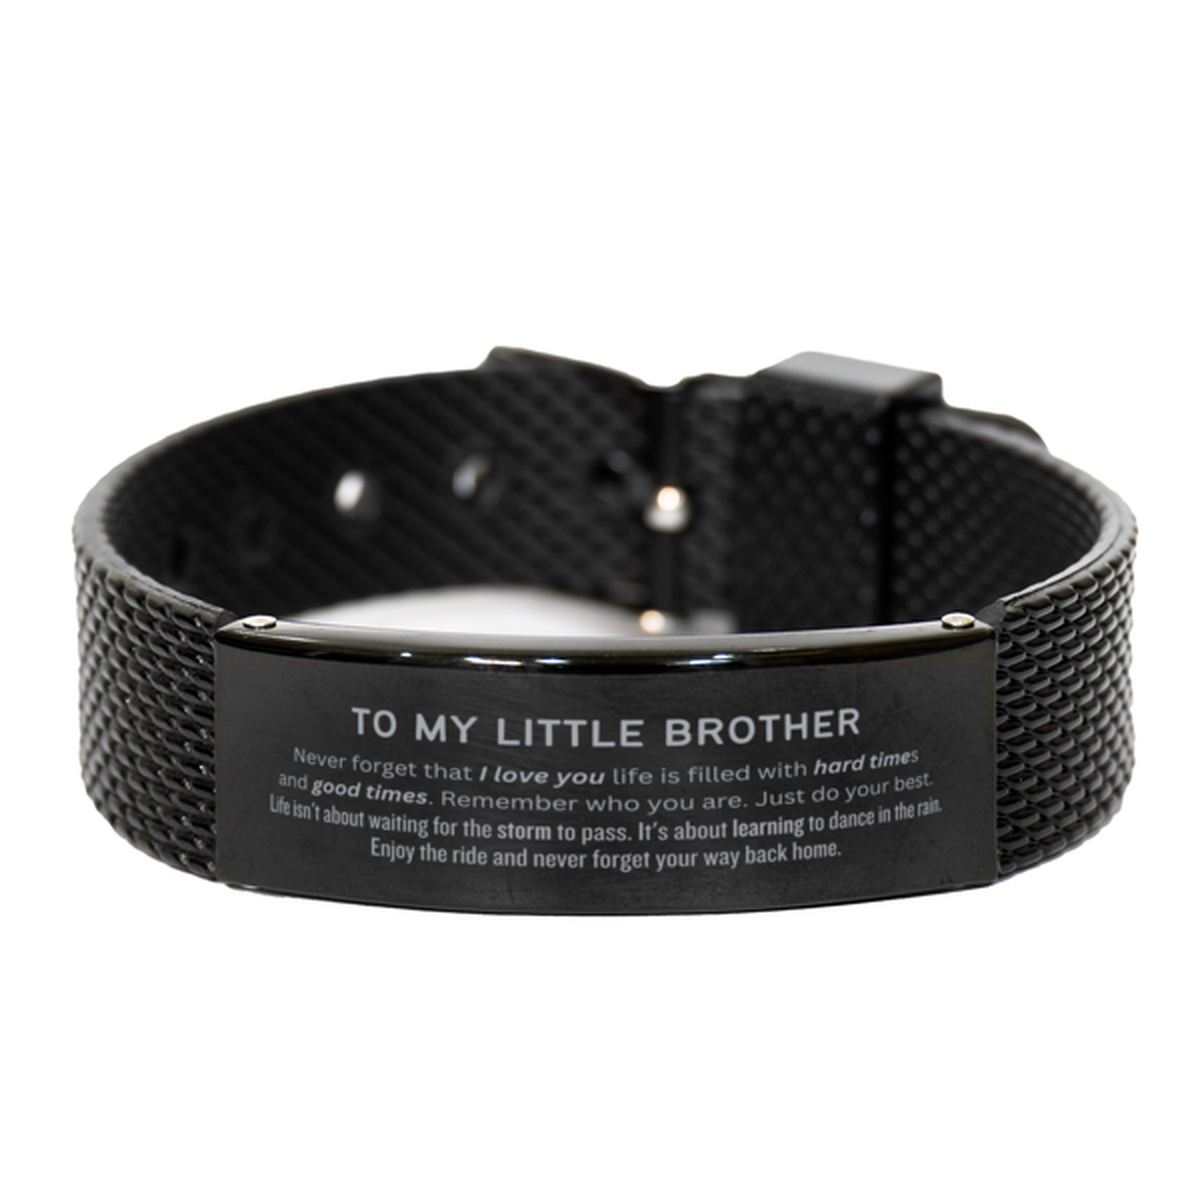 Christmas Little Brother Black Shark Mesh Bracelet Gifts, To My Little Brother Birthday Thank You Gifts For Little Brother, Graduation Unique Gifts For Little Brother To My Little Brother Never forget that I love you life is filled with hard times and goo